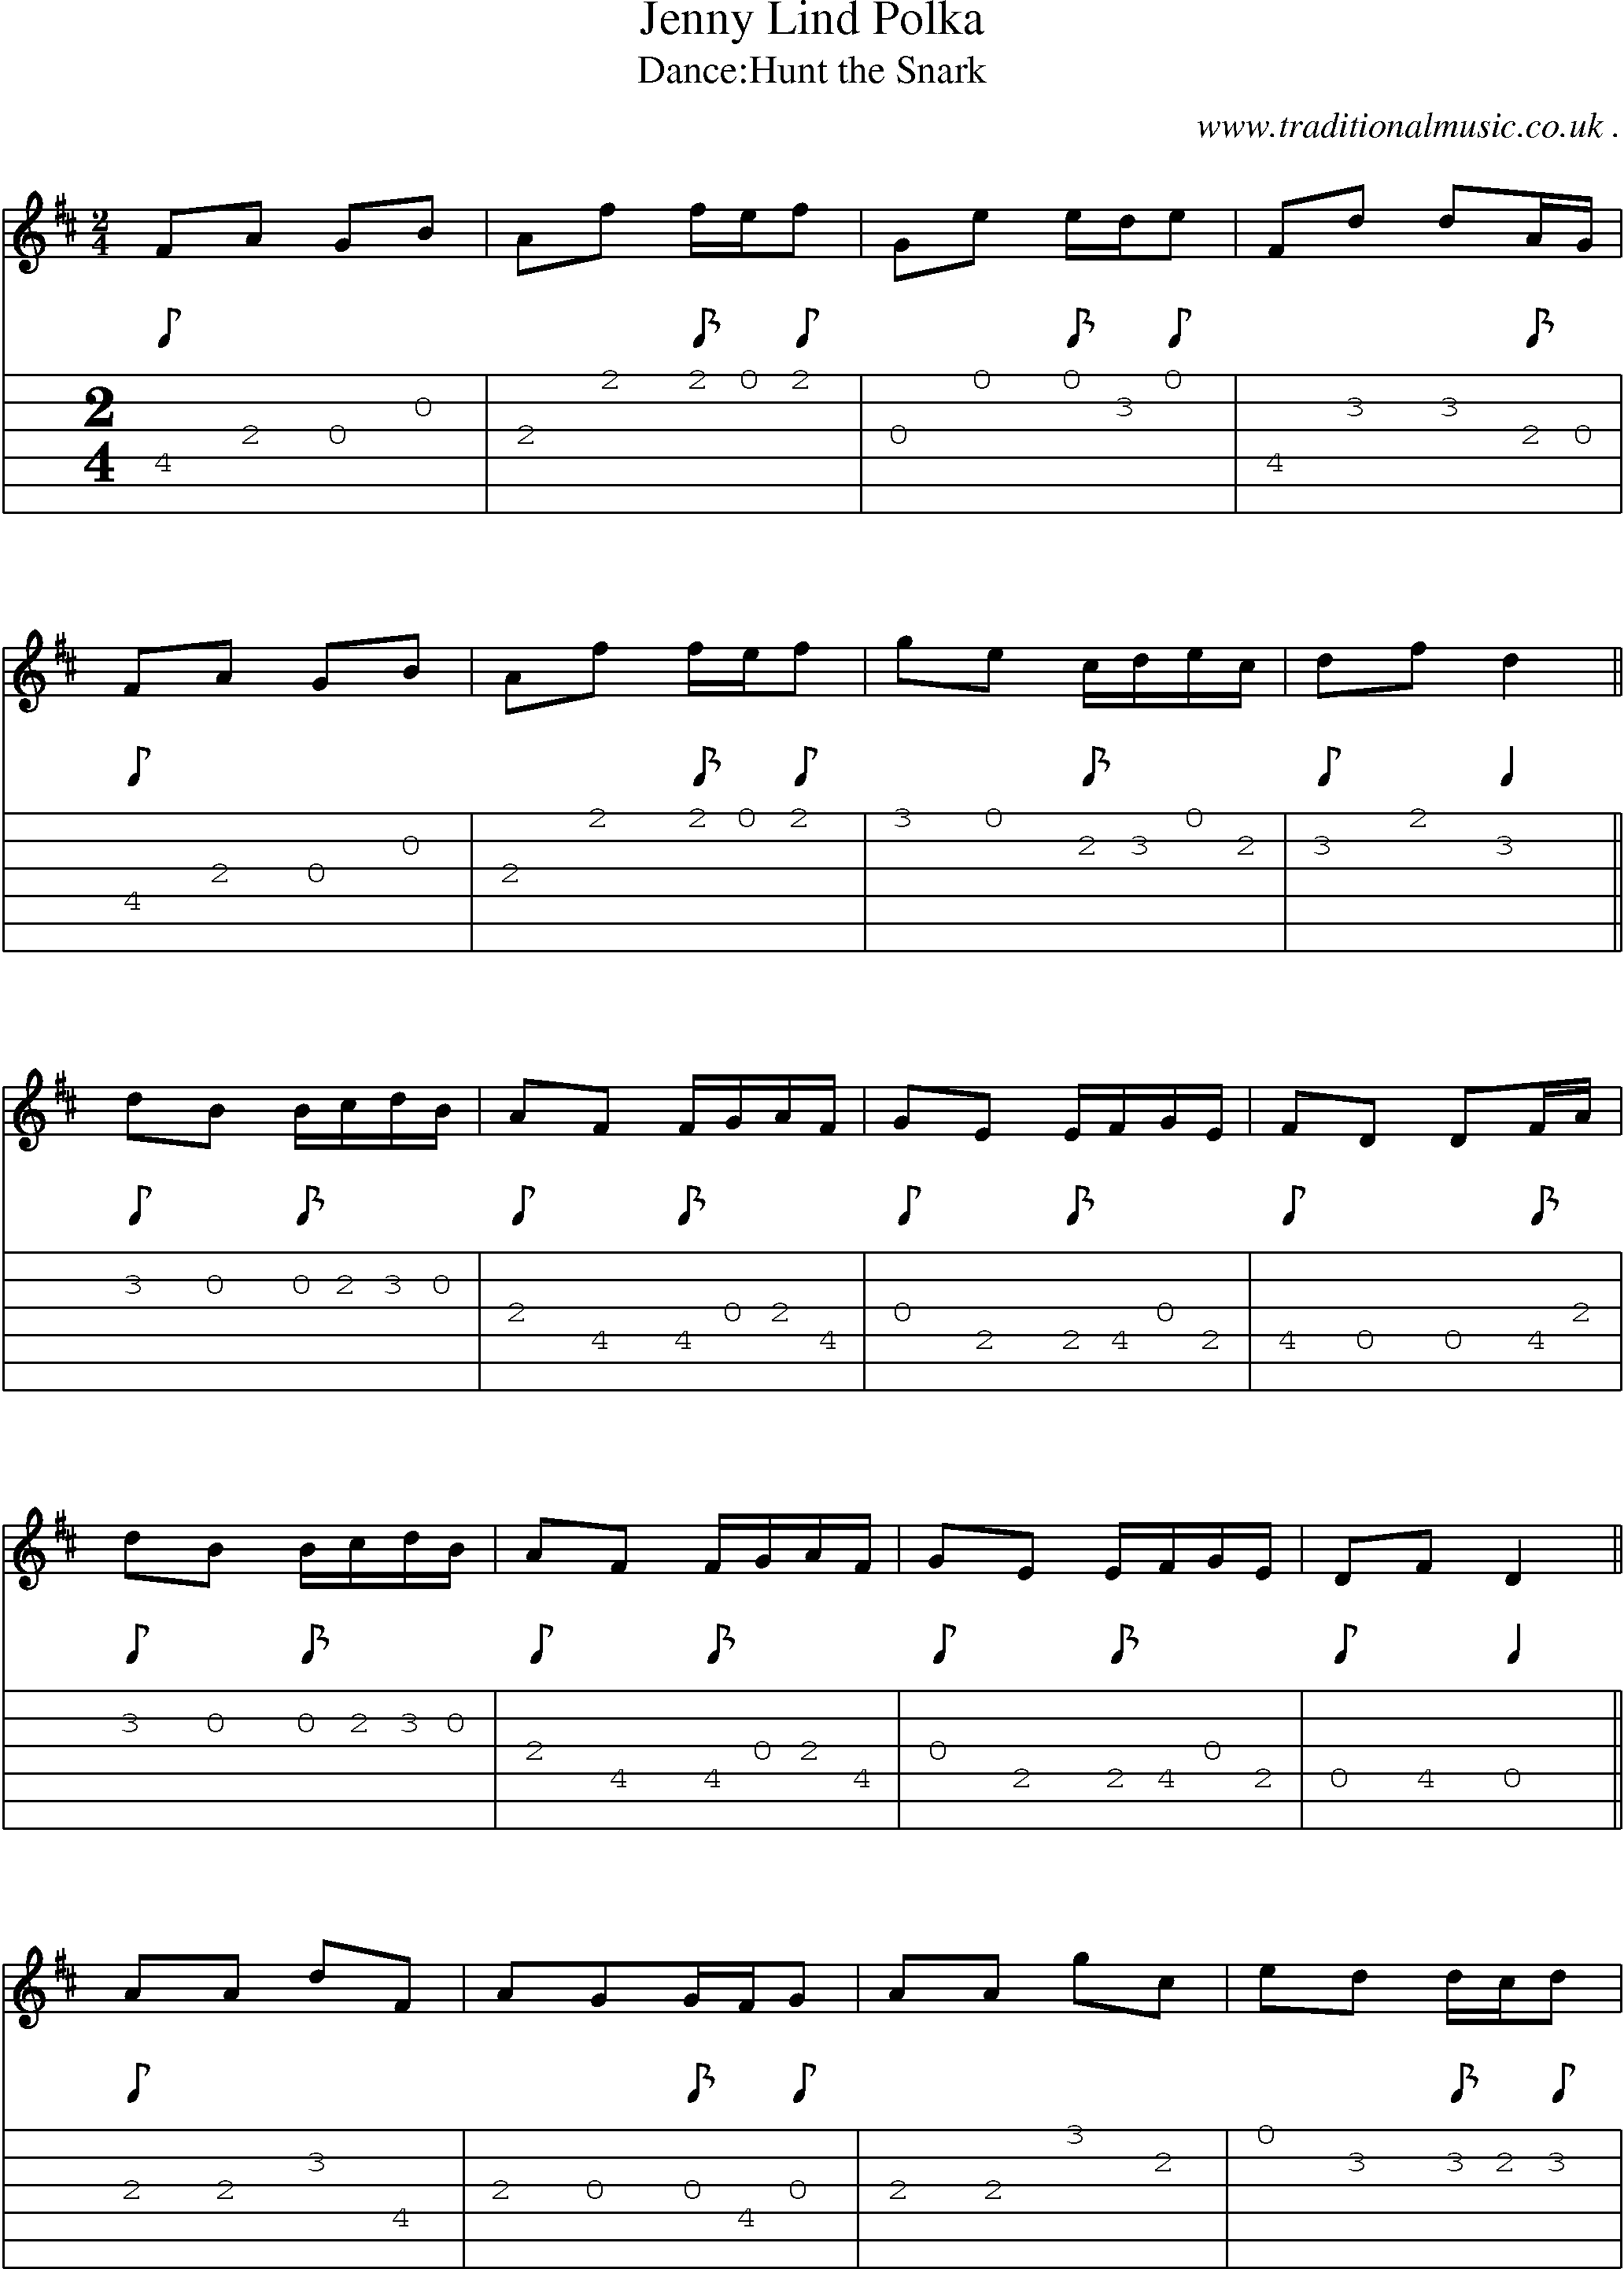 Sheet-Music and Guitar Tabs for Jenny Lind Polka